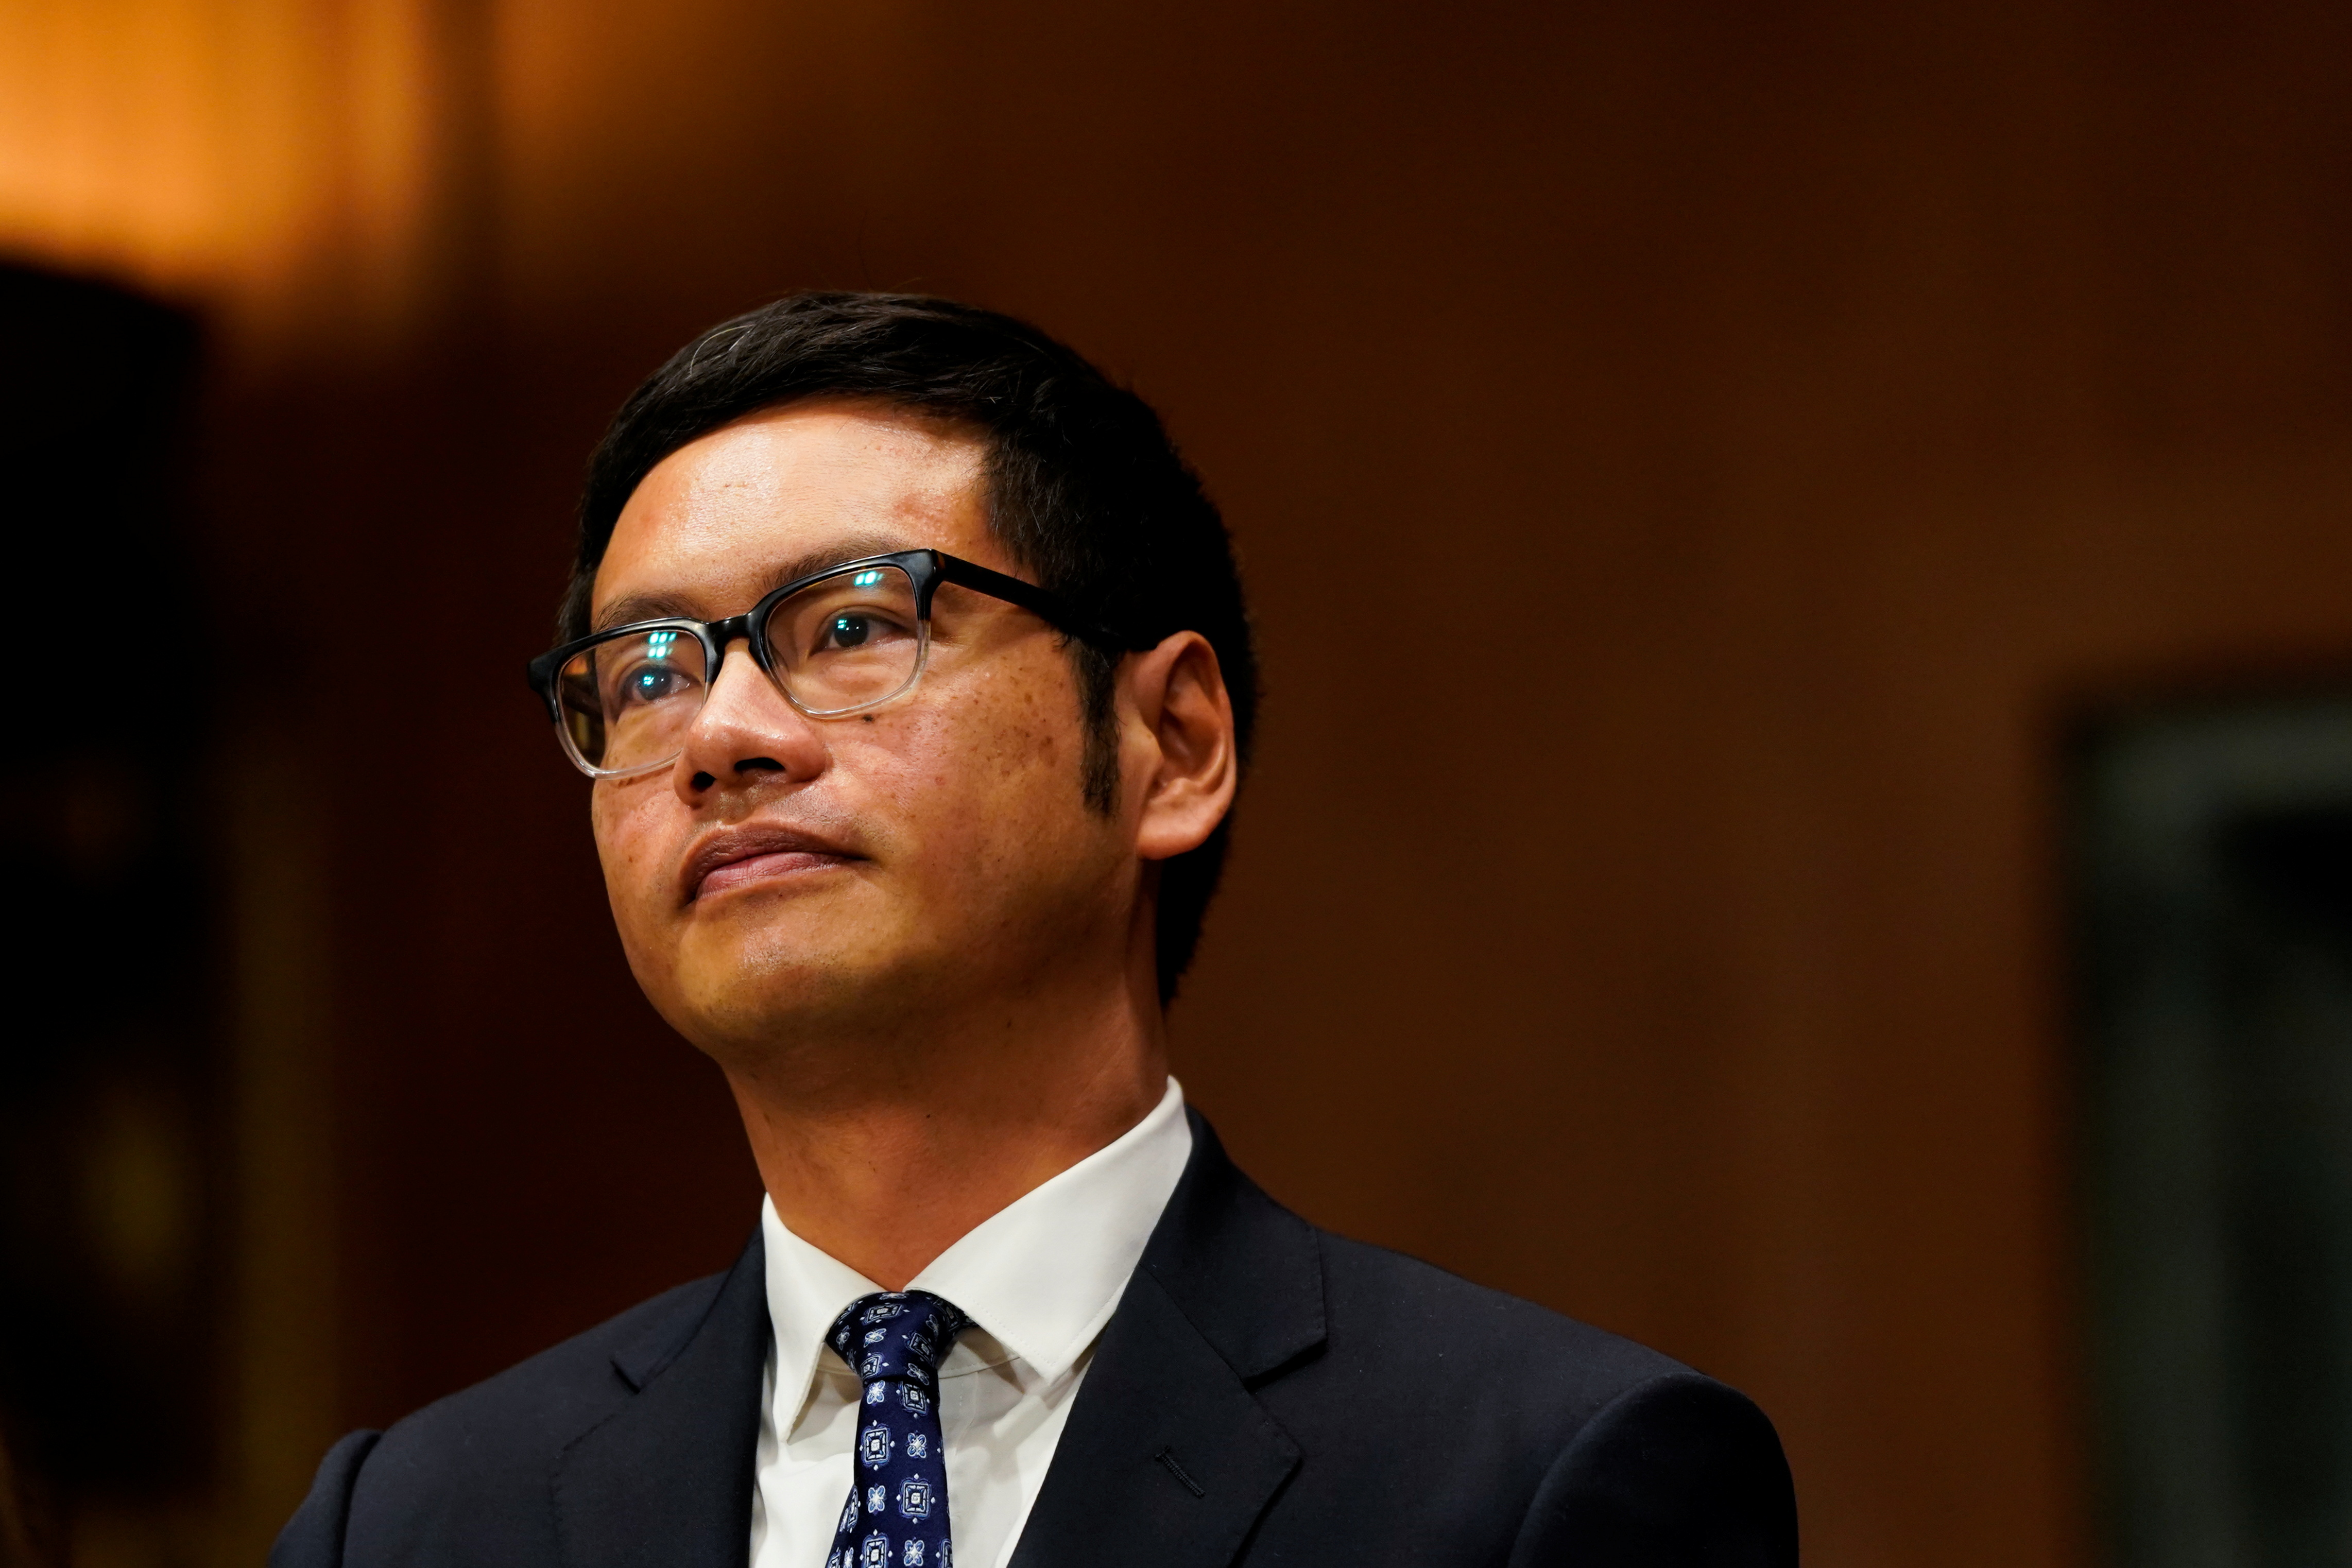 Dale Ho, a voting rights advocate with the ACLU nominated to become a federal district court judge in Manhattan, prepares to give his opening statement during a U.S. Senate Judiciary Committee hearing on Capitol Hill in Washington, U.S., December 1, 2021. REUTERS/Elizabeth Frantz